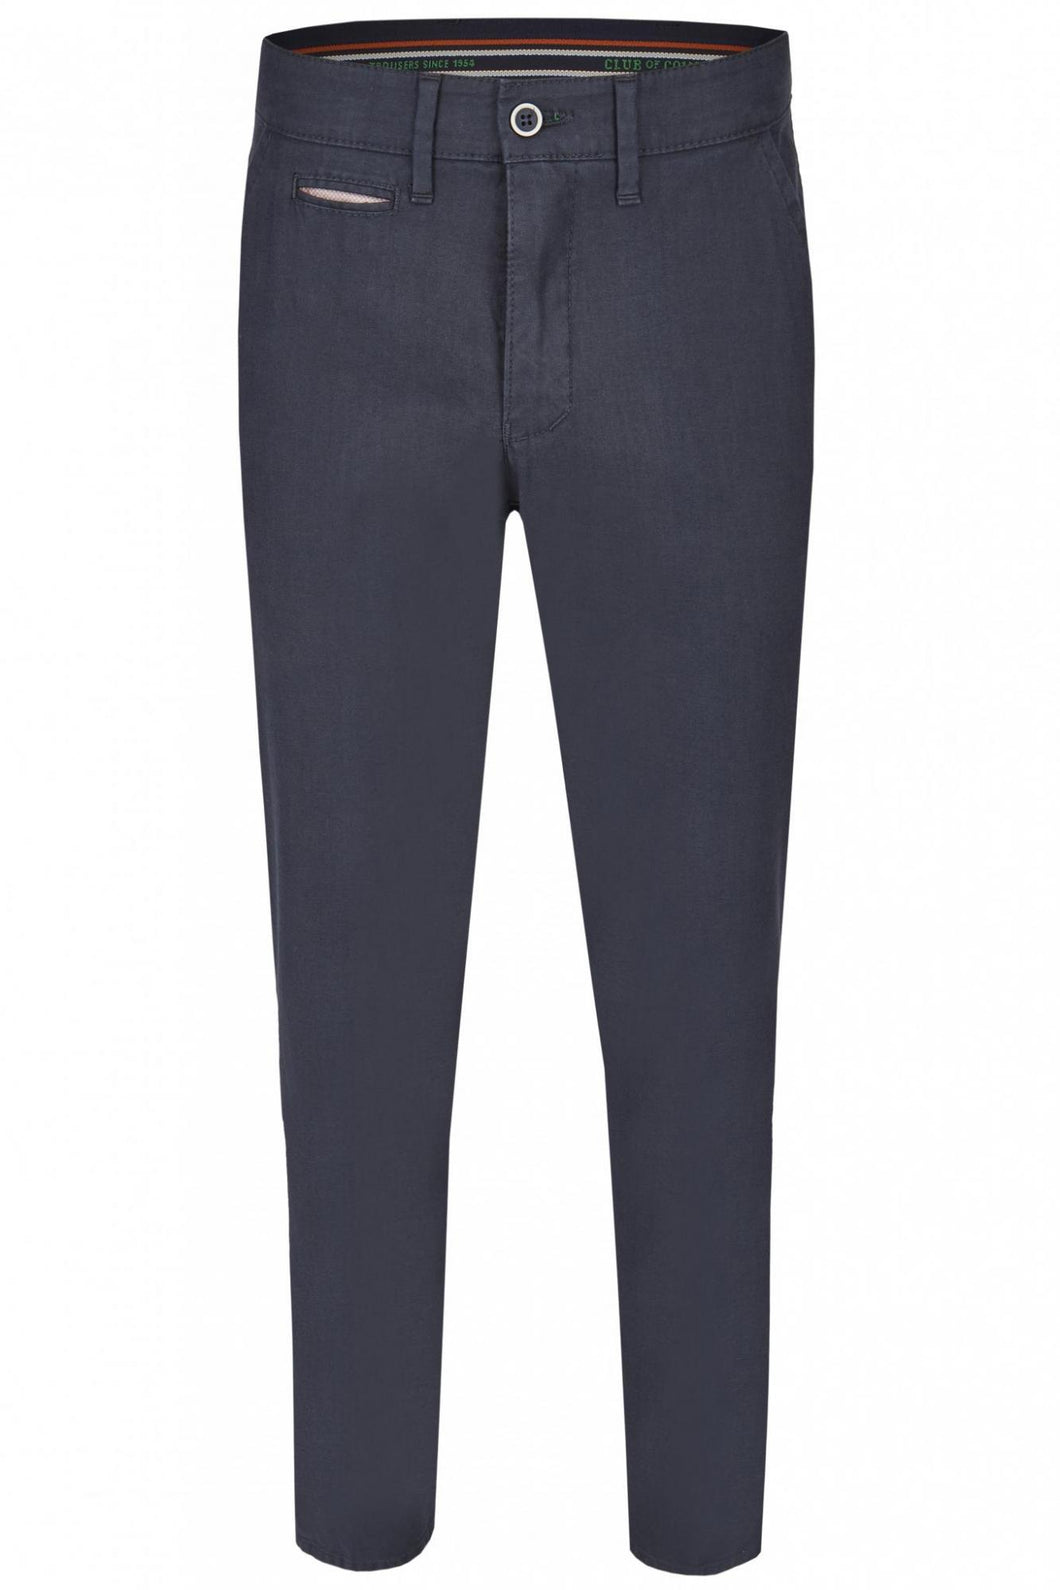 Club Of Comfort cotton trousers